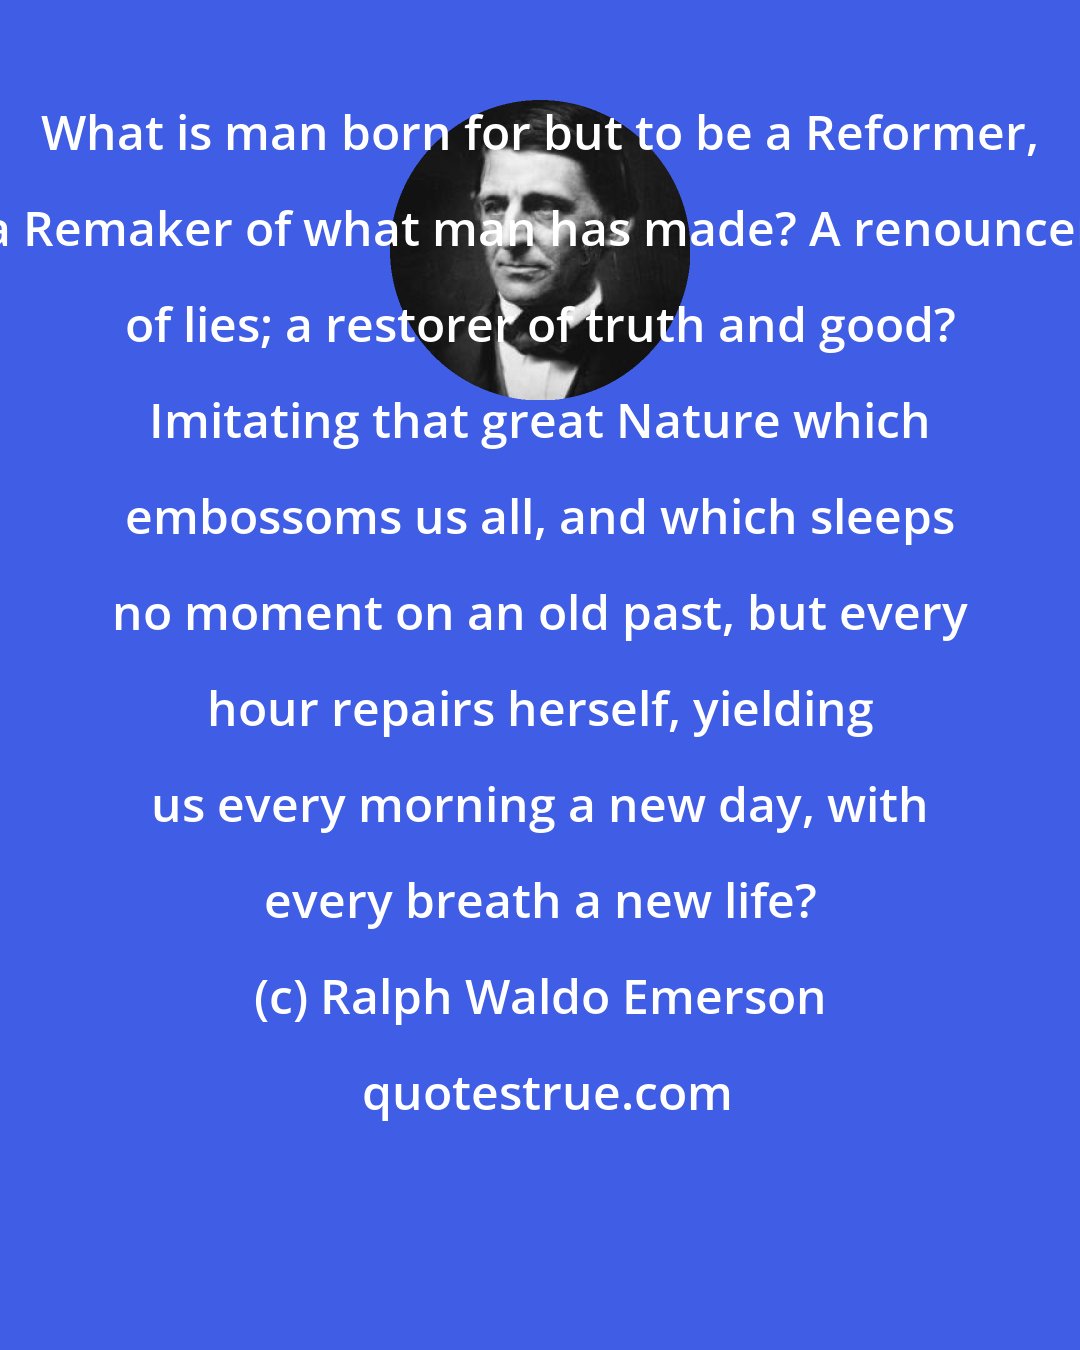 Ralph Waldo Emerson: What is man born for but to be a Reformer, a Remaker of what man has made? A renouncer of lies; a restorer of truth and good? Imitating that great Nature which embossoms us all, and which sleeps no moment on an old past, but every hour repairs herself, yielding us every morning a new day, with every breath a new life?